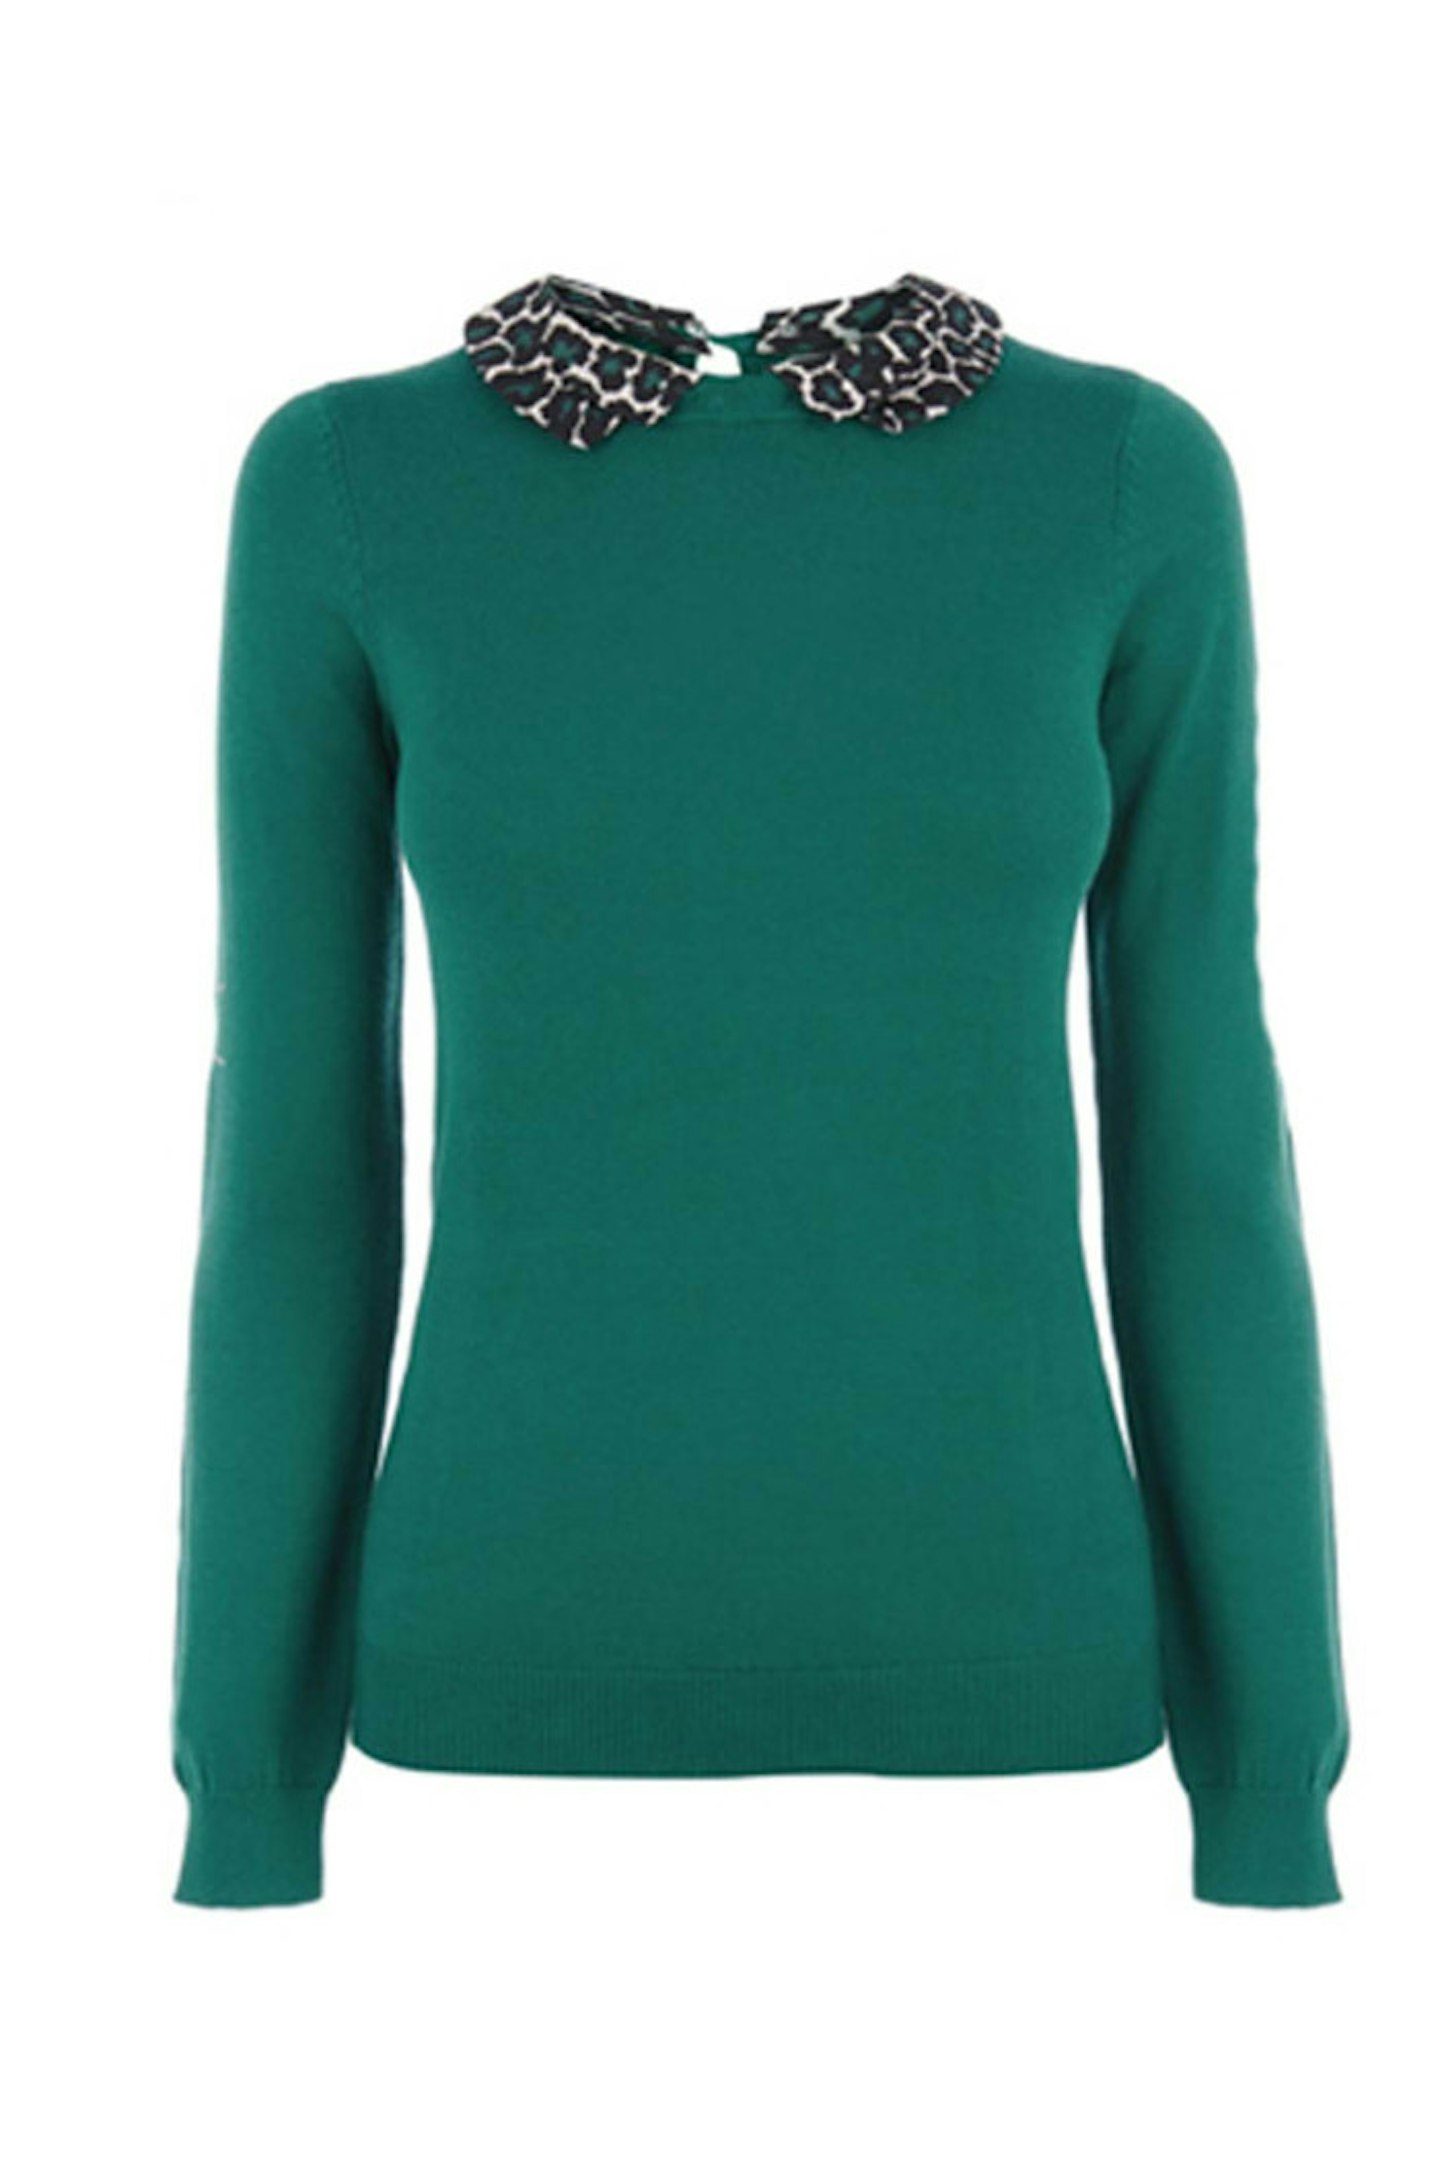 28. Green knit with leopard print collar, £38, Oasis